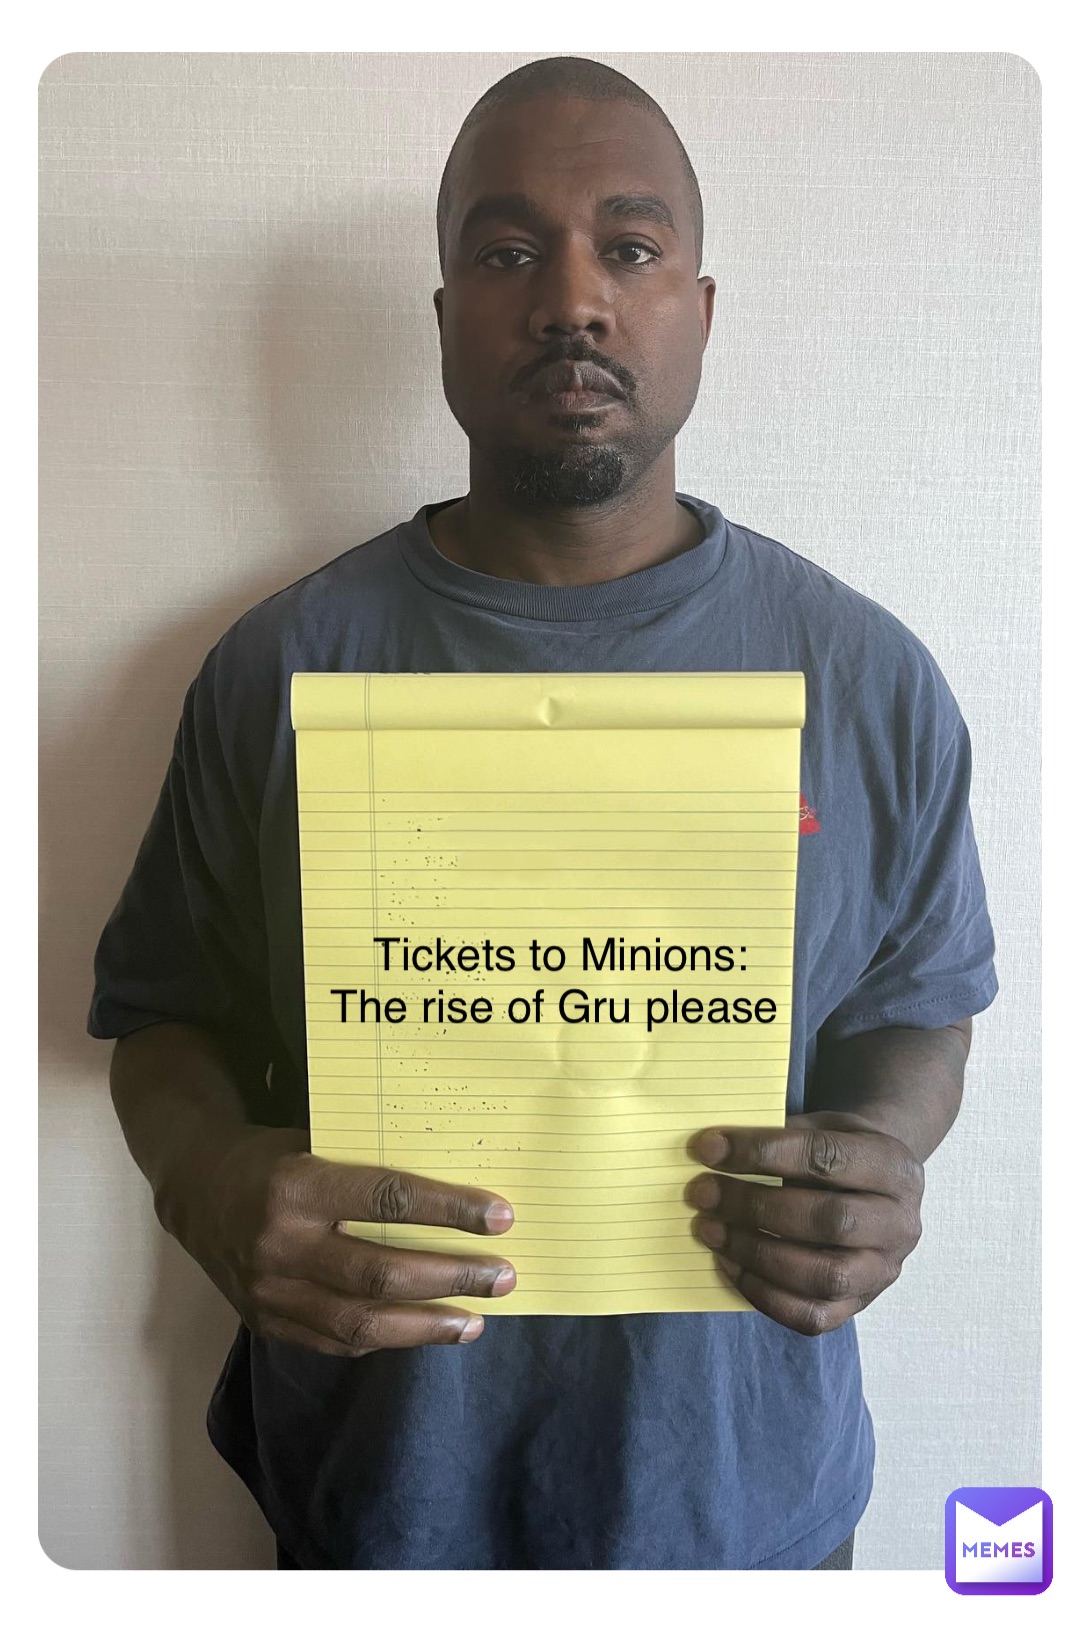 Tickets to Minions: The rise of Gru please